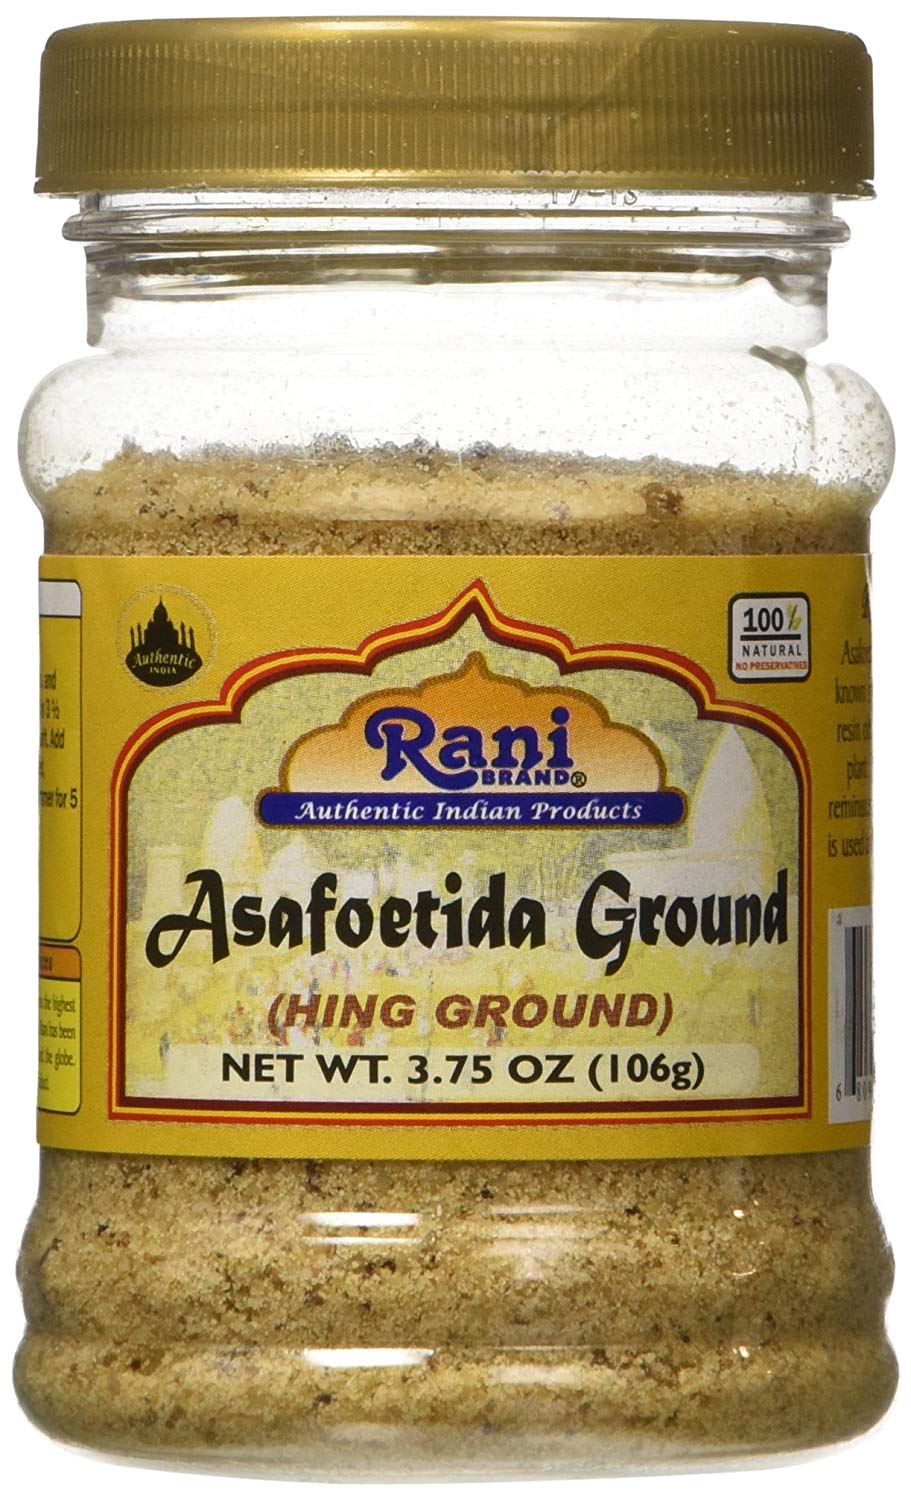 How can asafoetida be used in non-Indian cooking? - Quora